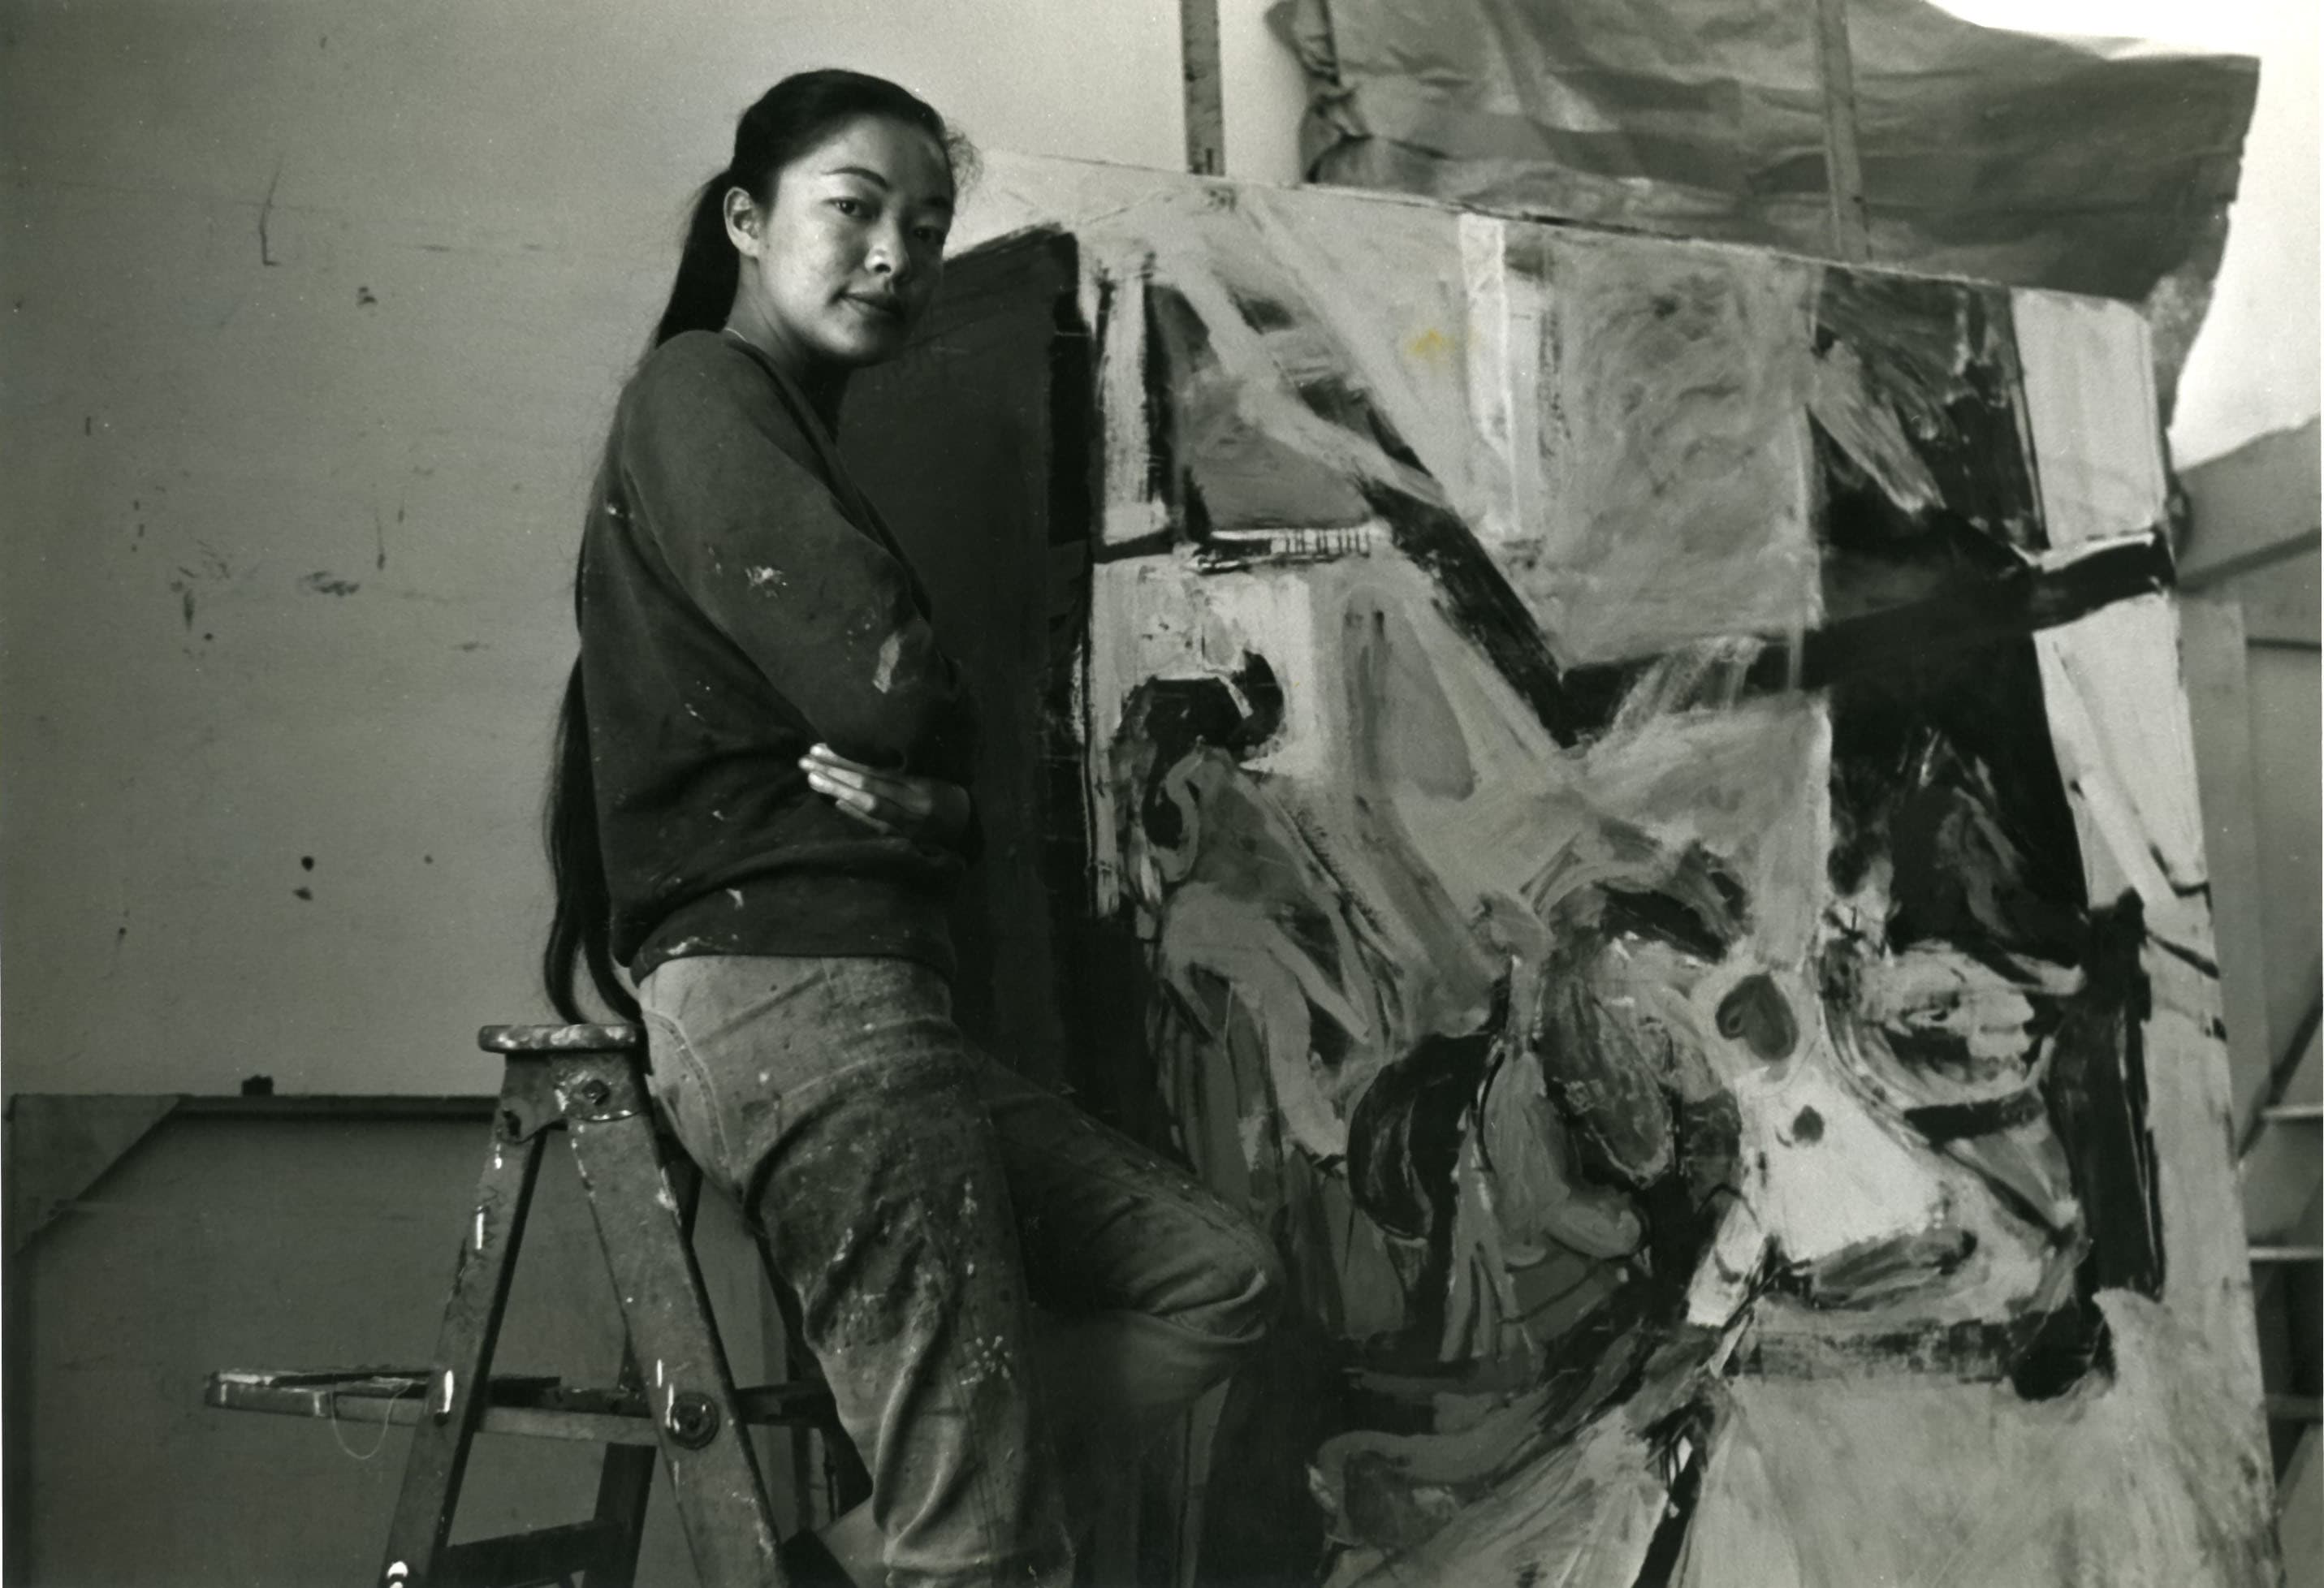 Celebrate Art and Culture in San Francisco for Women's History Month